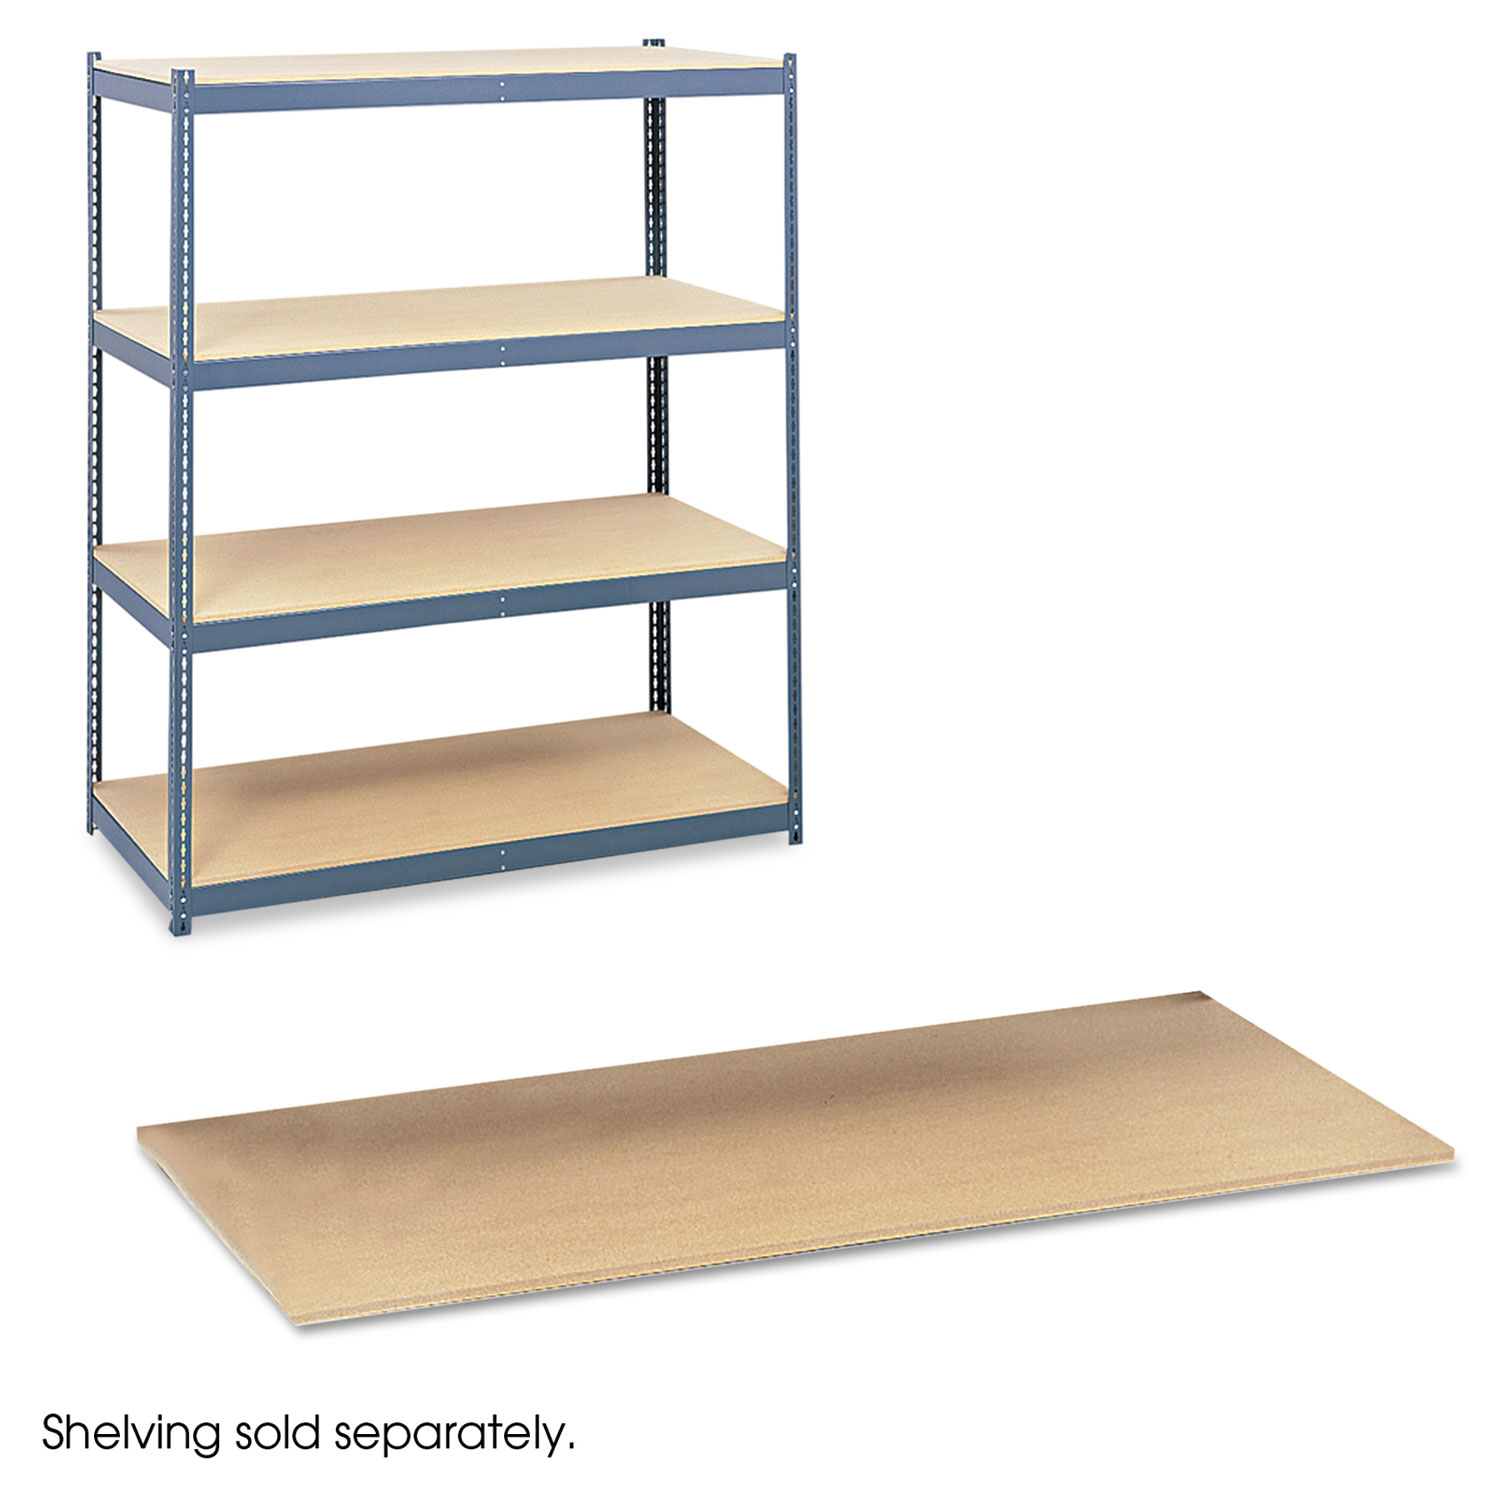 Particleboard Shelves for Steel Pack Archival Shelving, 69w x 33d x84w, Box of 4